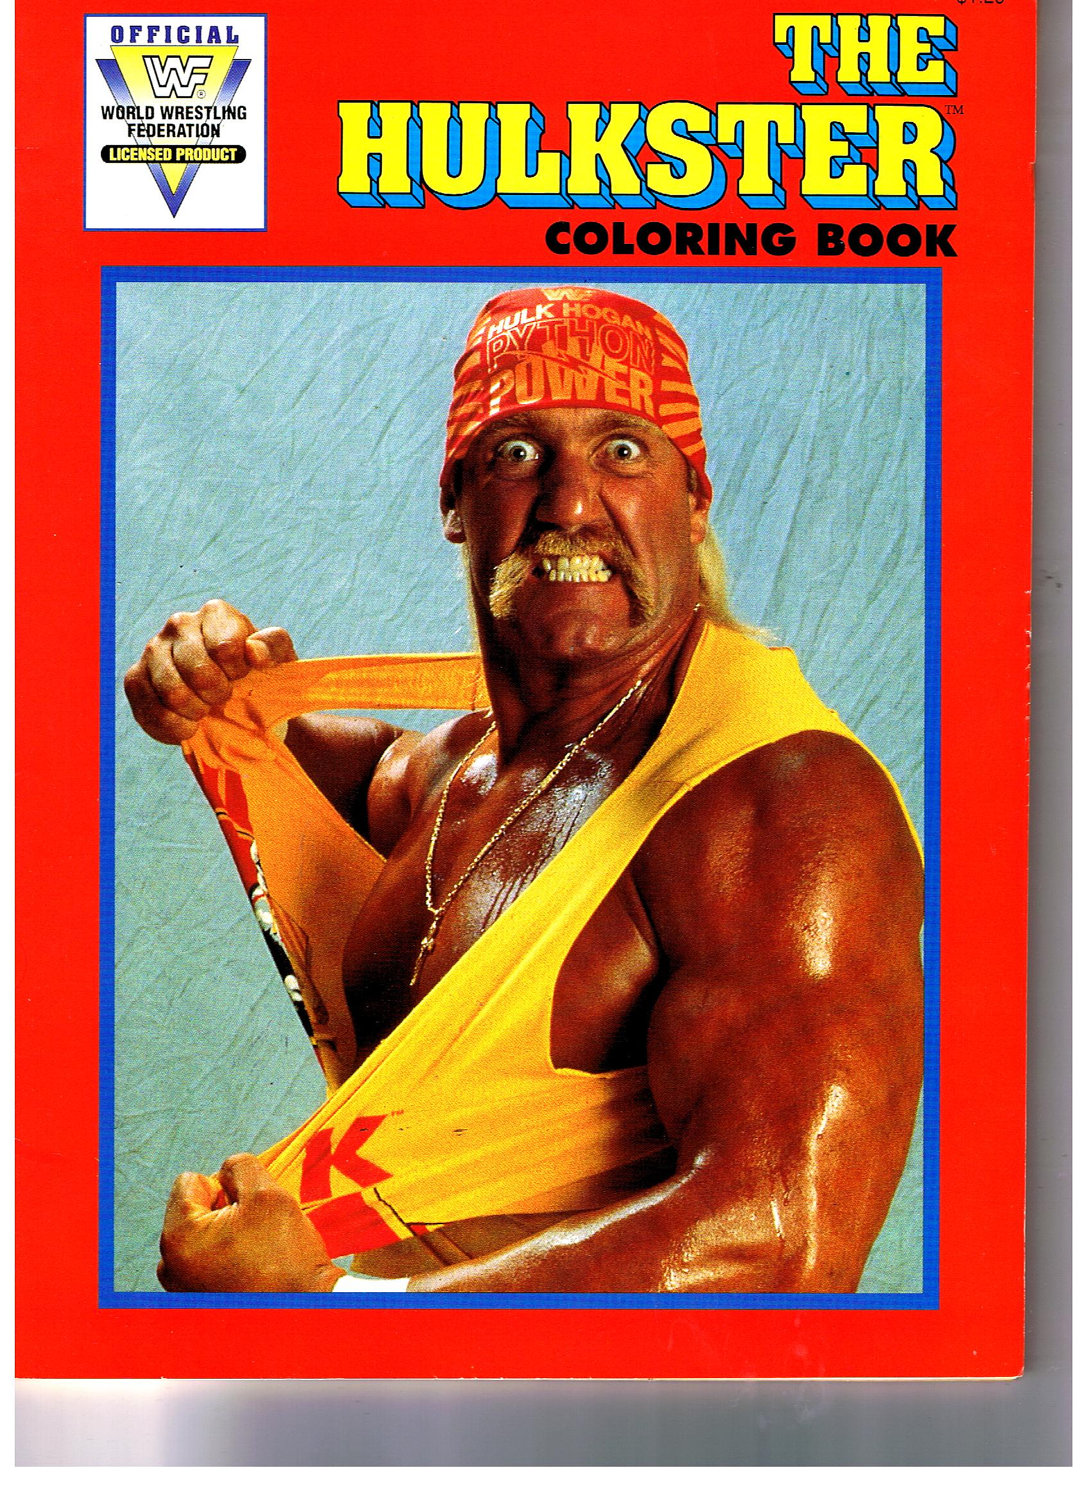 Someone Bought This: Hulk Hogan coloring book and Ultimate Warrior ...